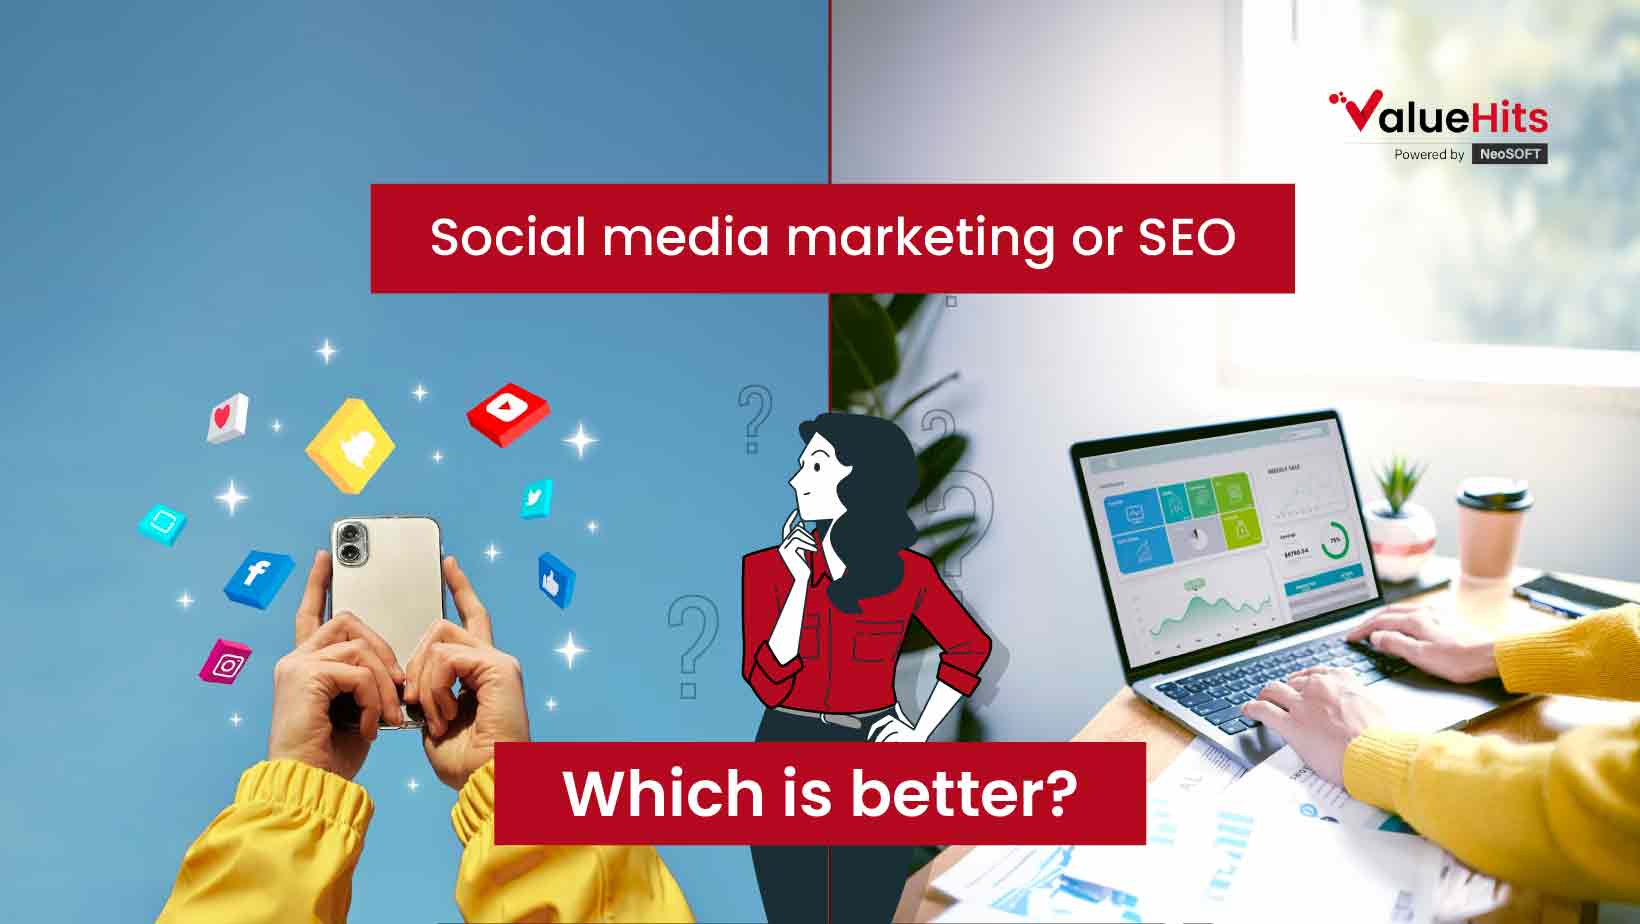 Social media marketing or SEO: Which is better